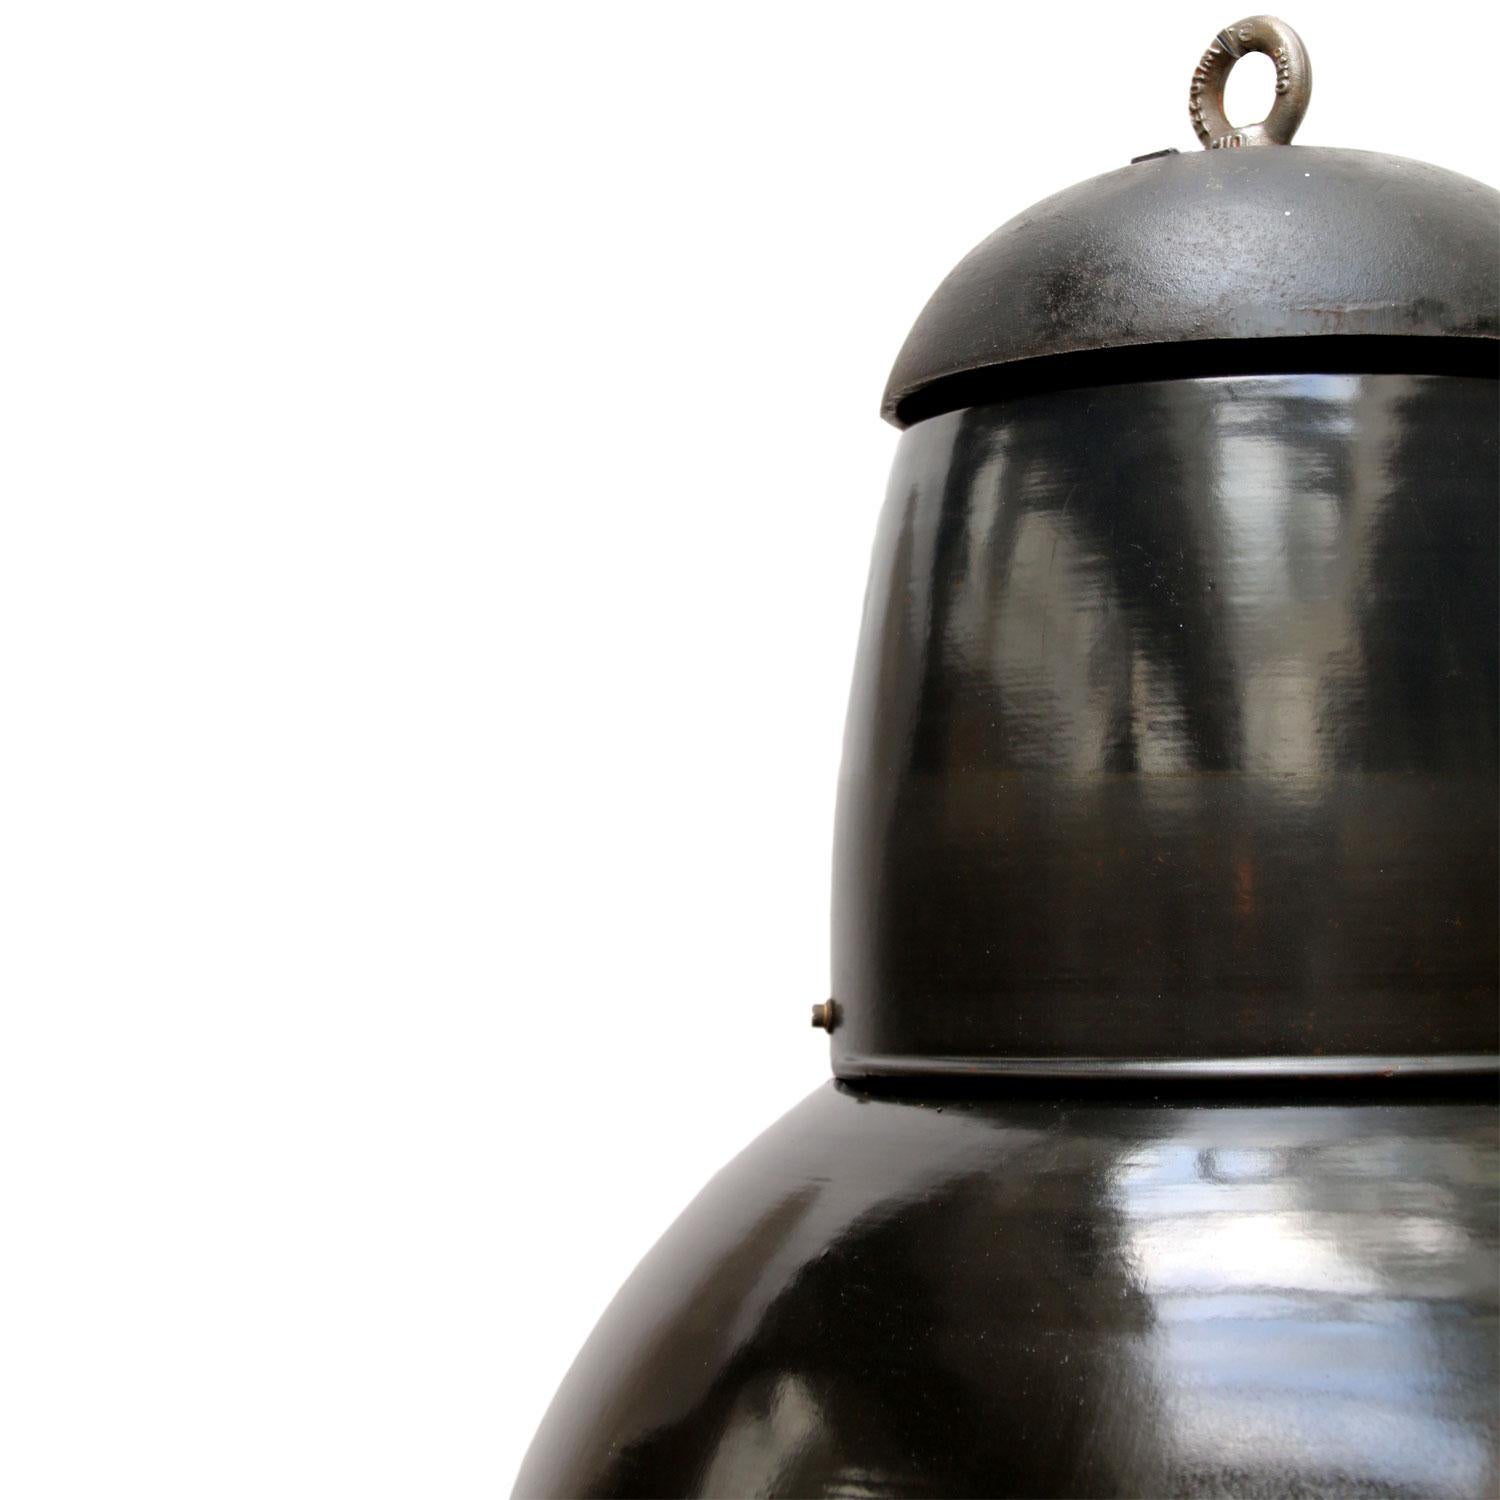 Black enamel Industrial pendant.
Cast iron top. White interior.

Weight: 7.5 kg / 16.5 lb

Priced per individual item. All lamps have been made suitable by international standards for incandescent light bulbs, energy-efficient and LED bulbs. E26/E27